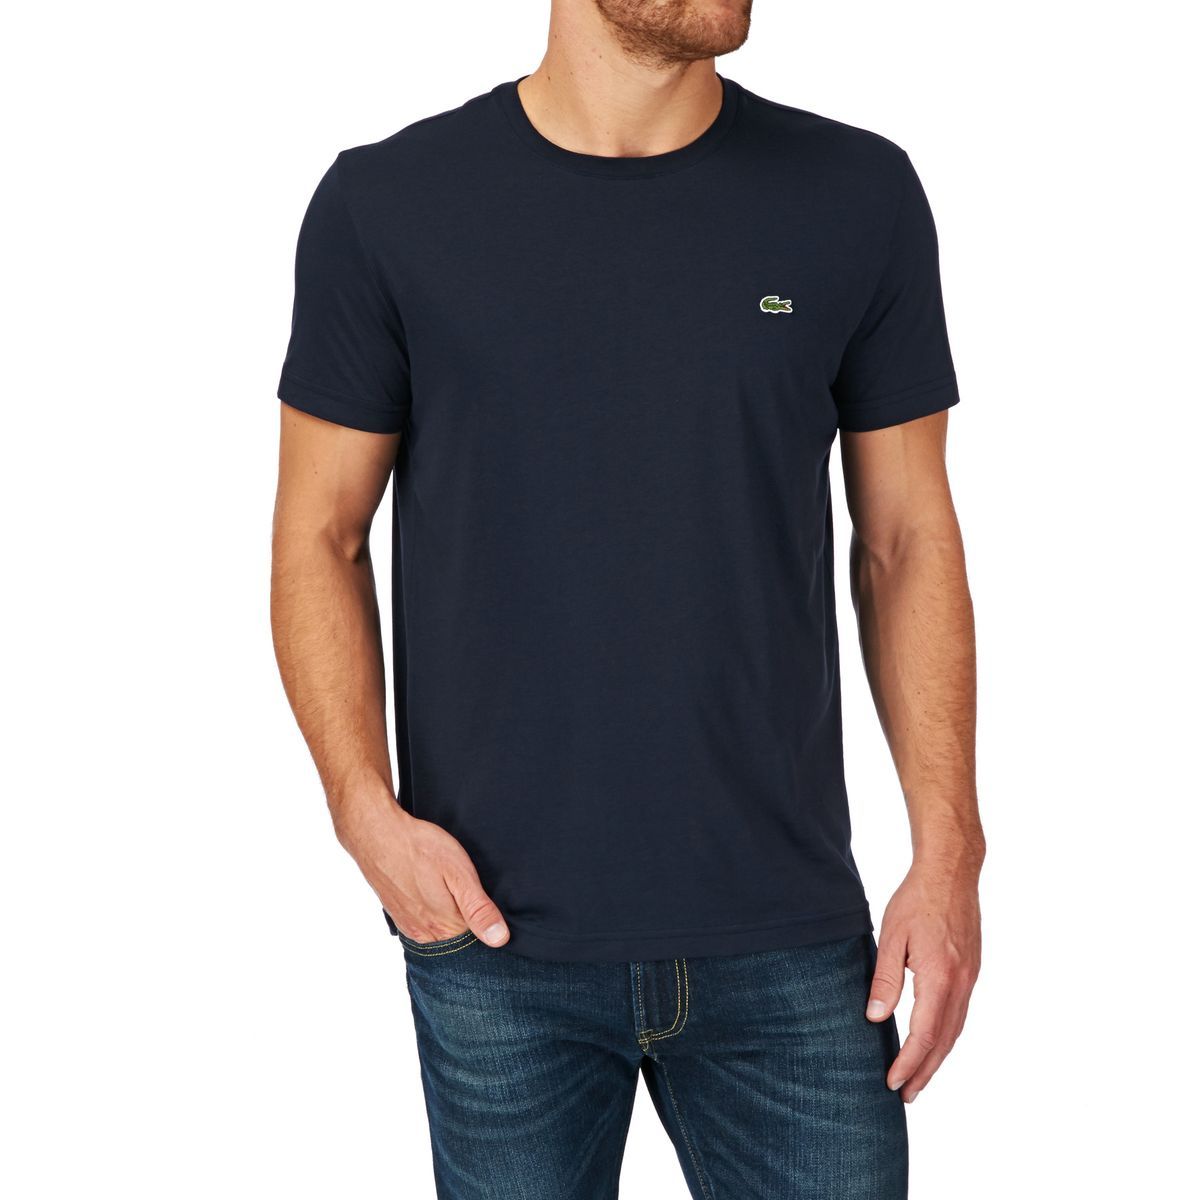 lacoste navy shirt